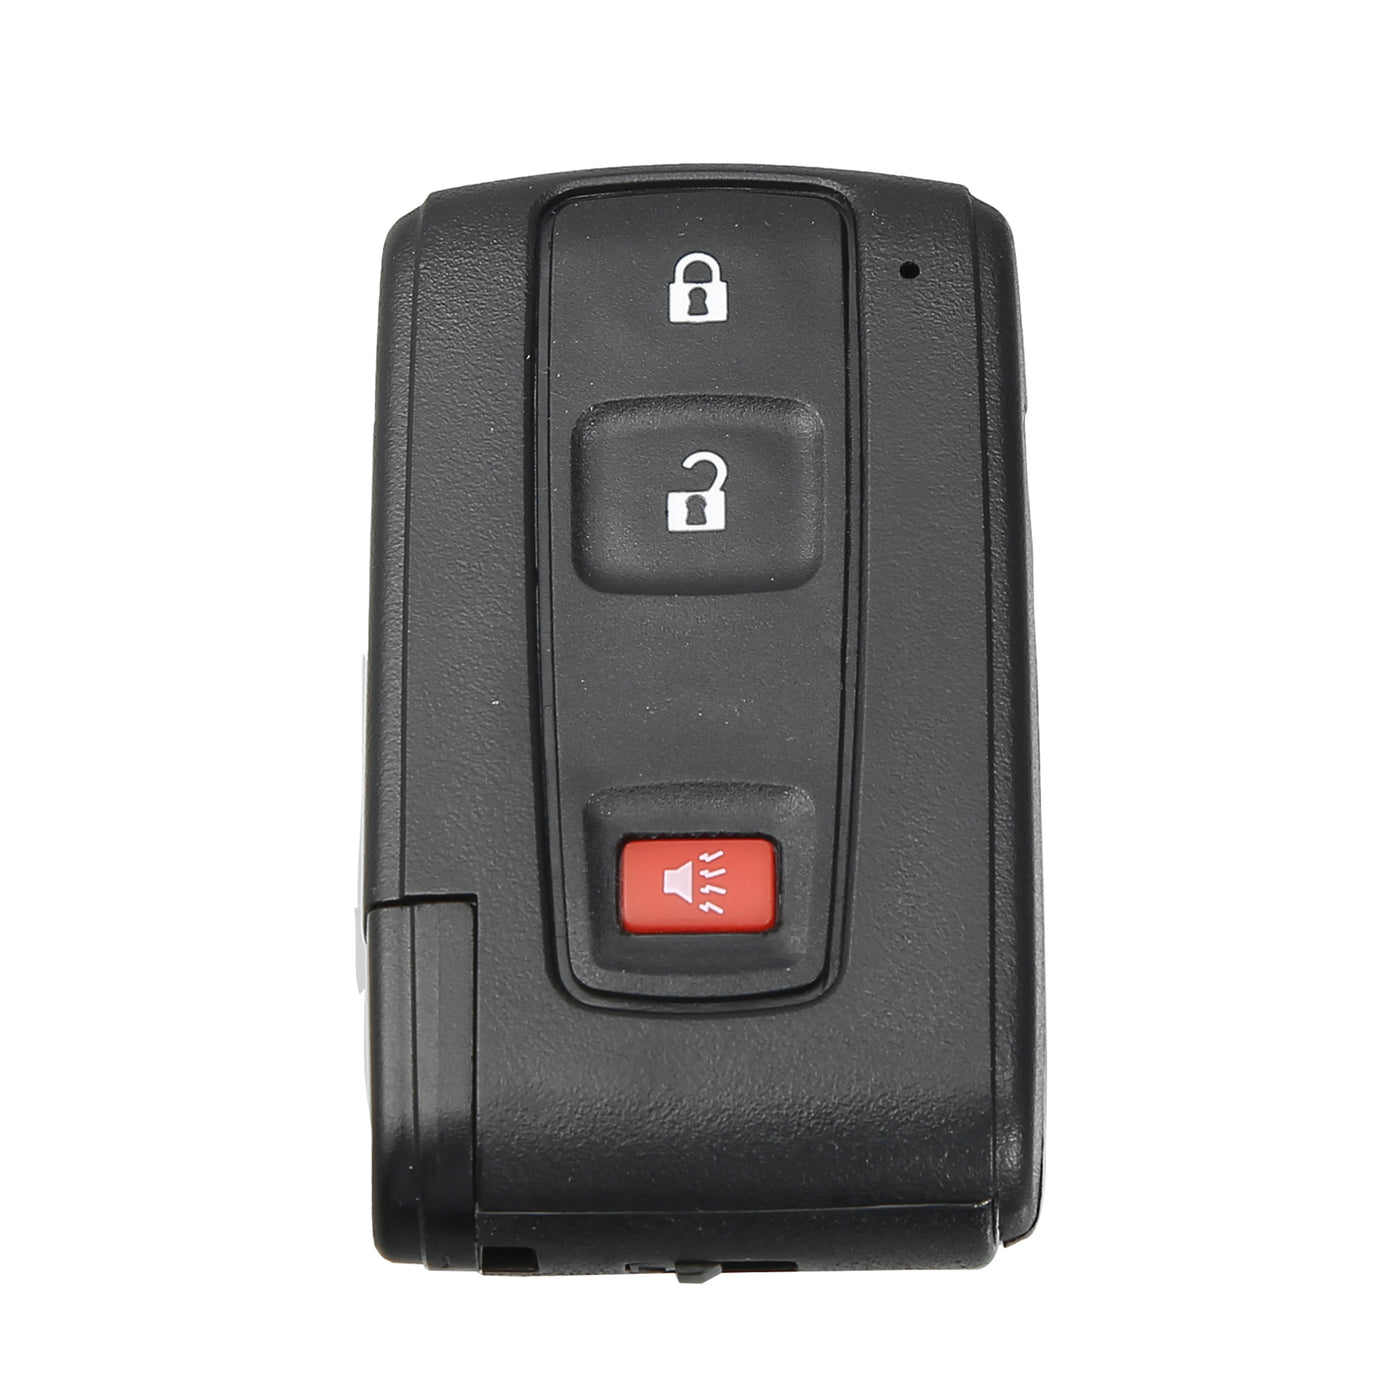 X AUTOHAUX 312MHz MOZB21TG Replacement Proximity No Smart Entry Remote Key Fob for Toyota Prius 04-2009 3 Buttons Semi-intelligent Key 89070-47180 Fit for Black Logo Not for the Silver Tone